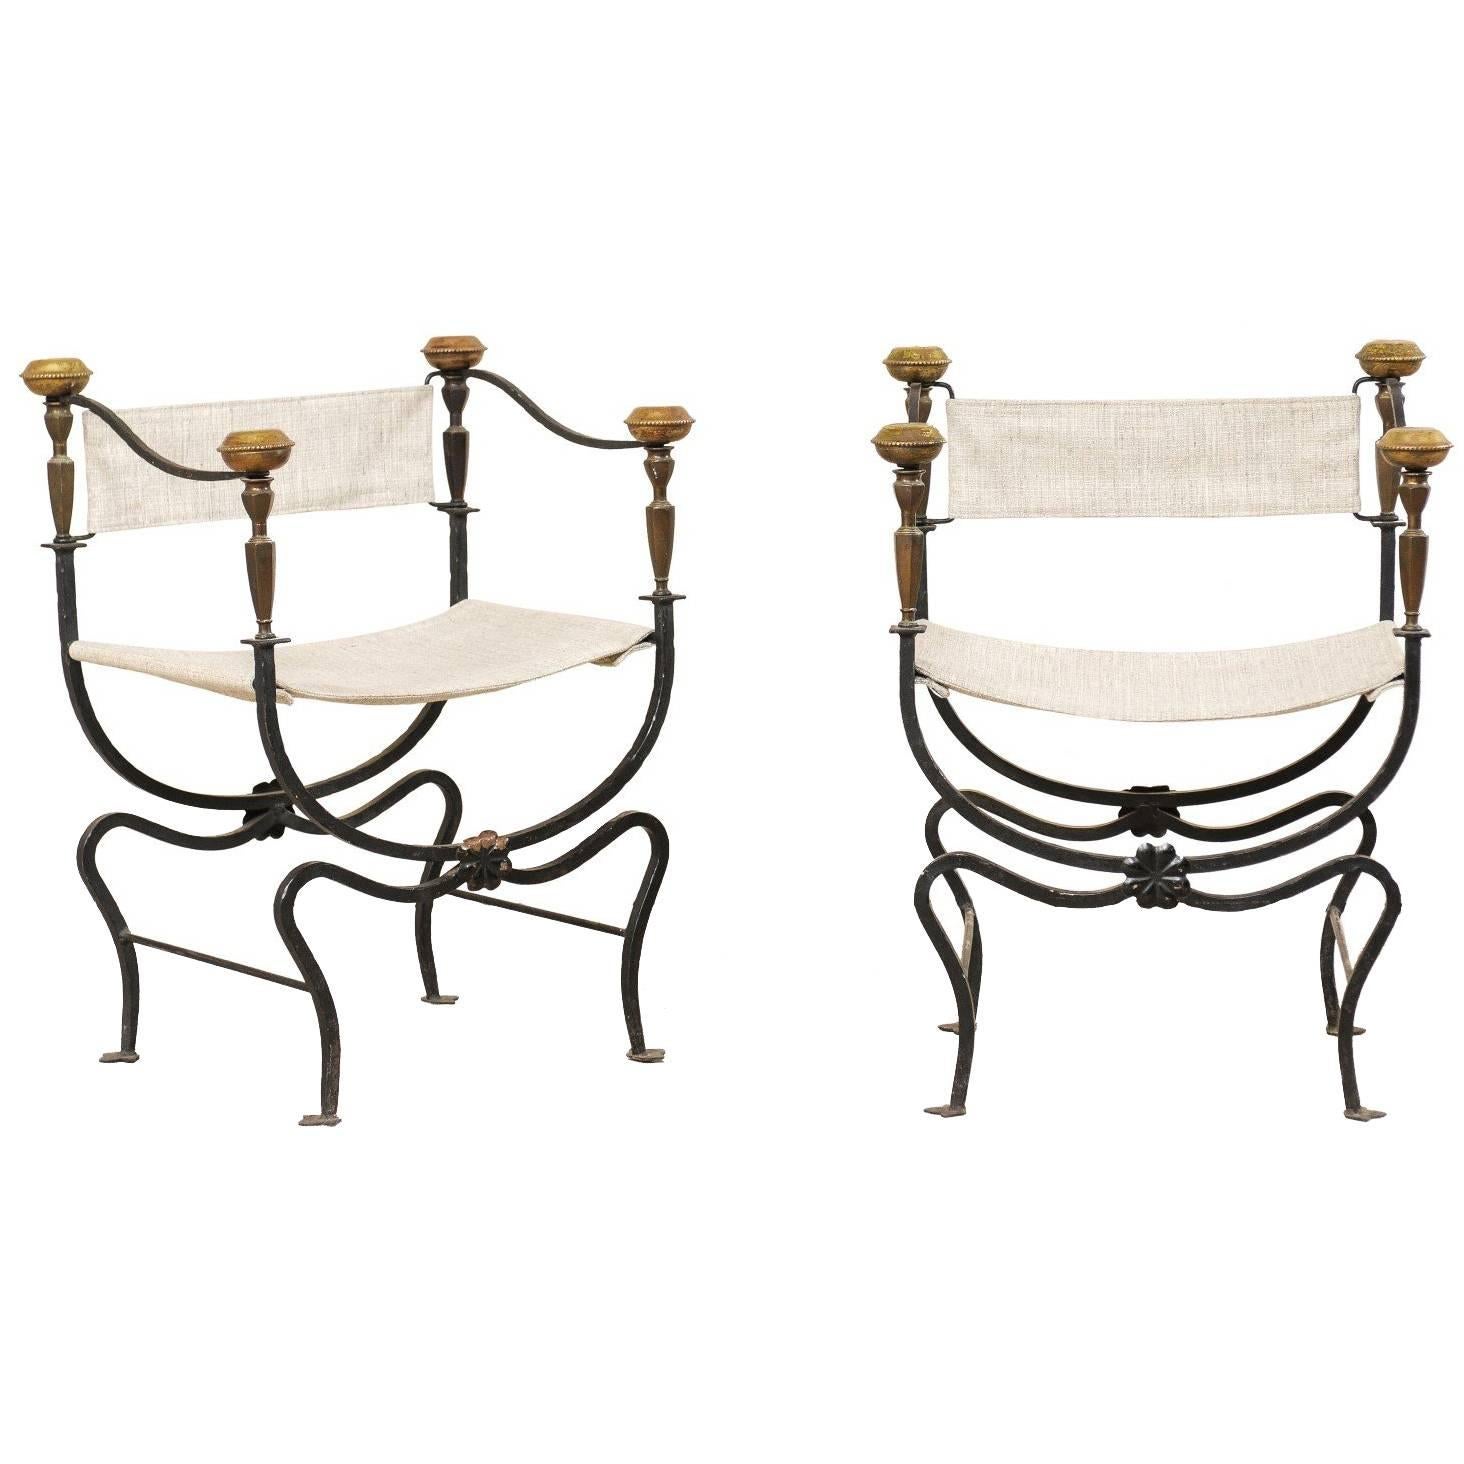 Pair of Italian Curule Savonarola Chairs from the Early 20th Century